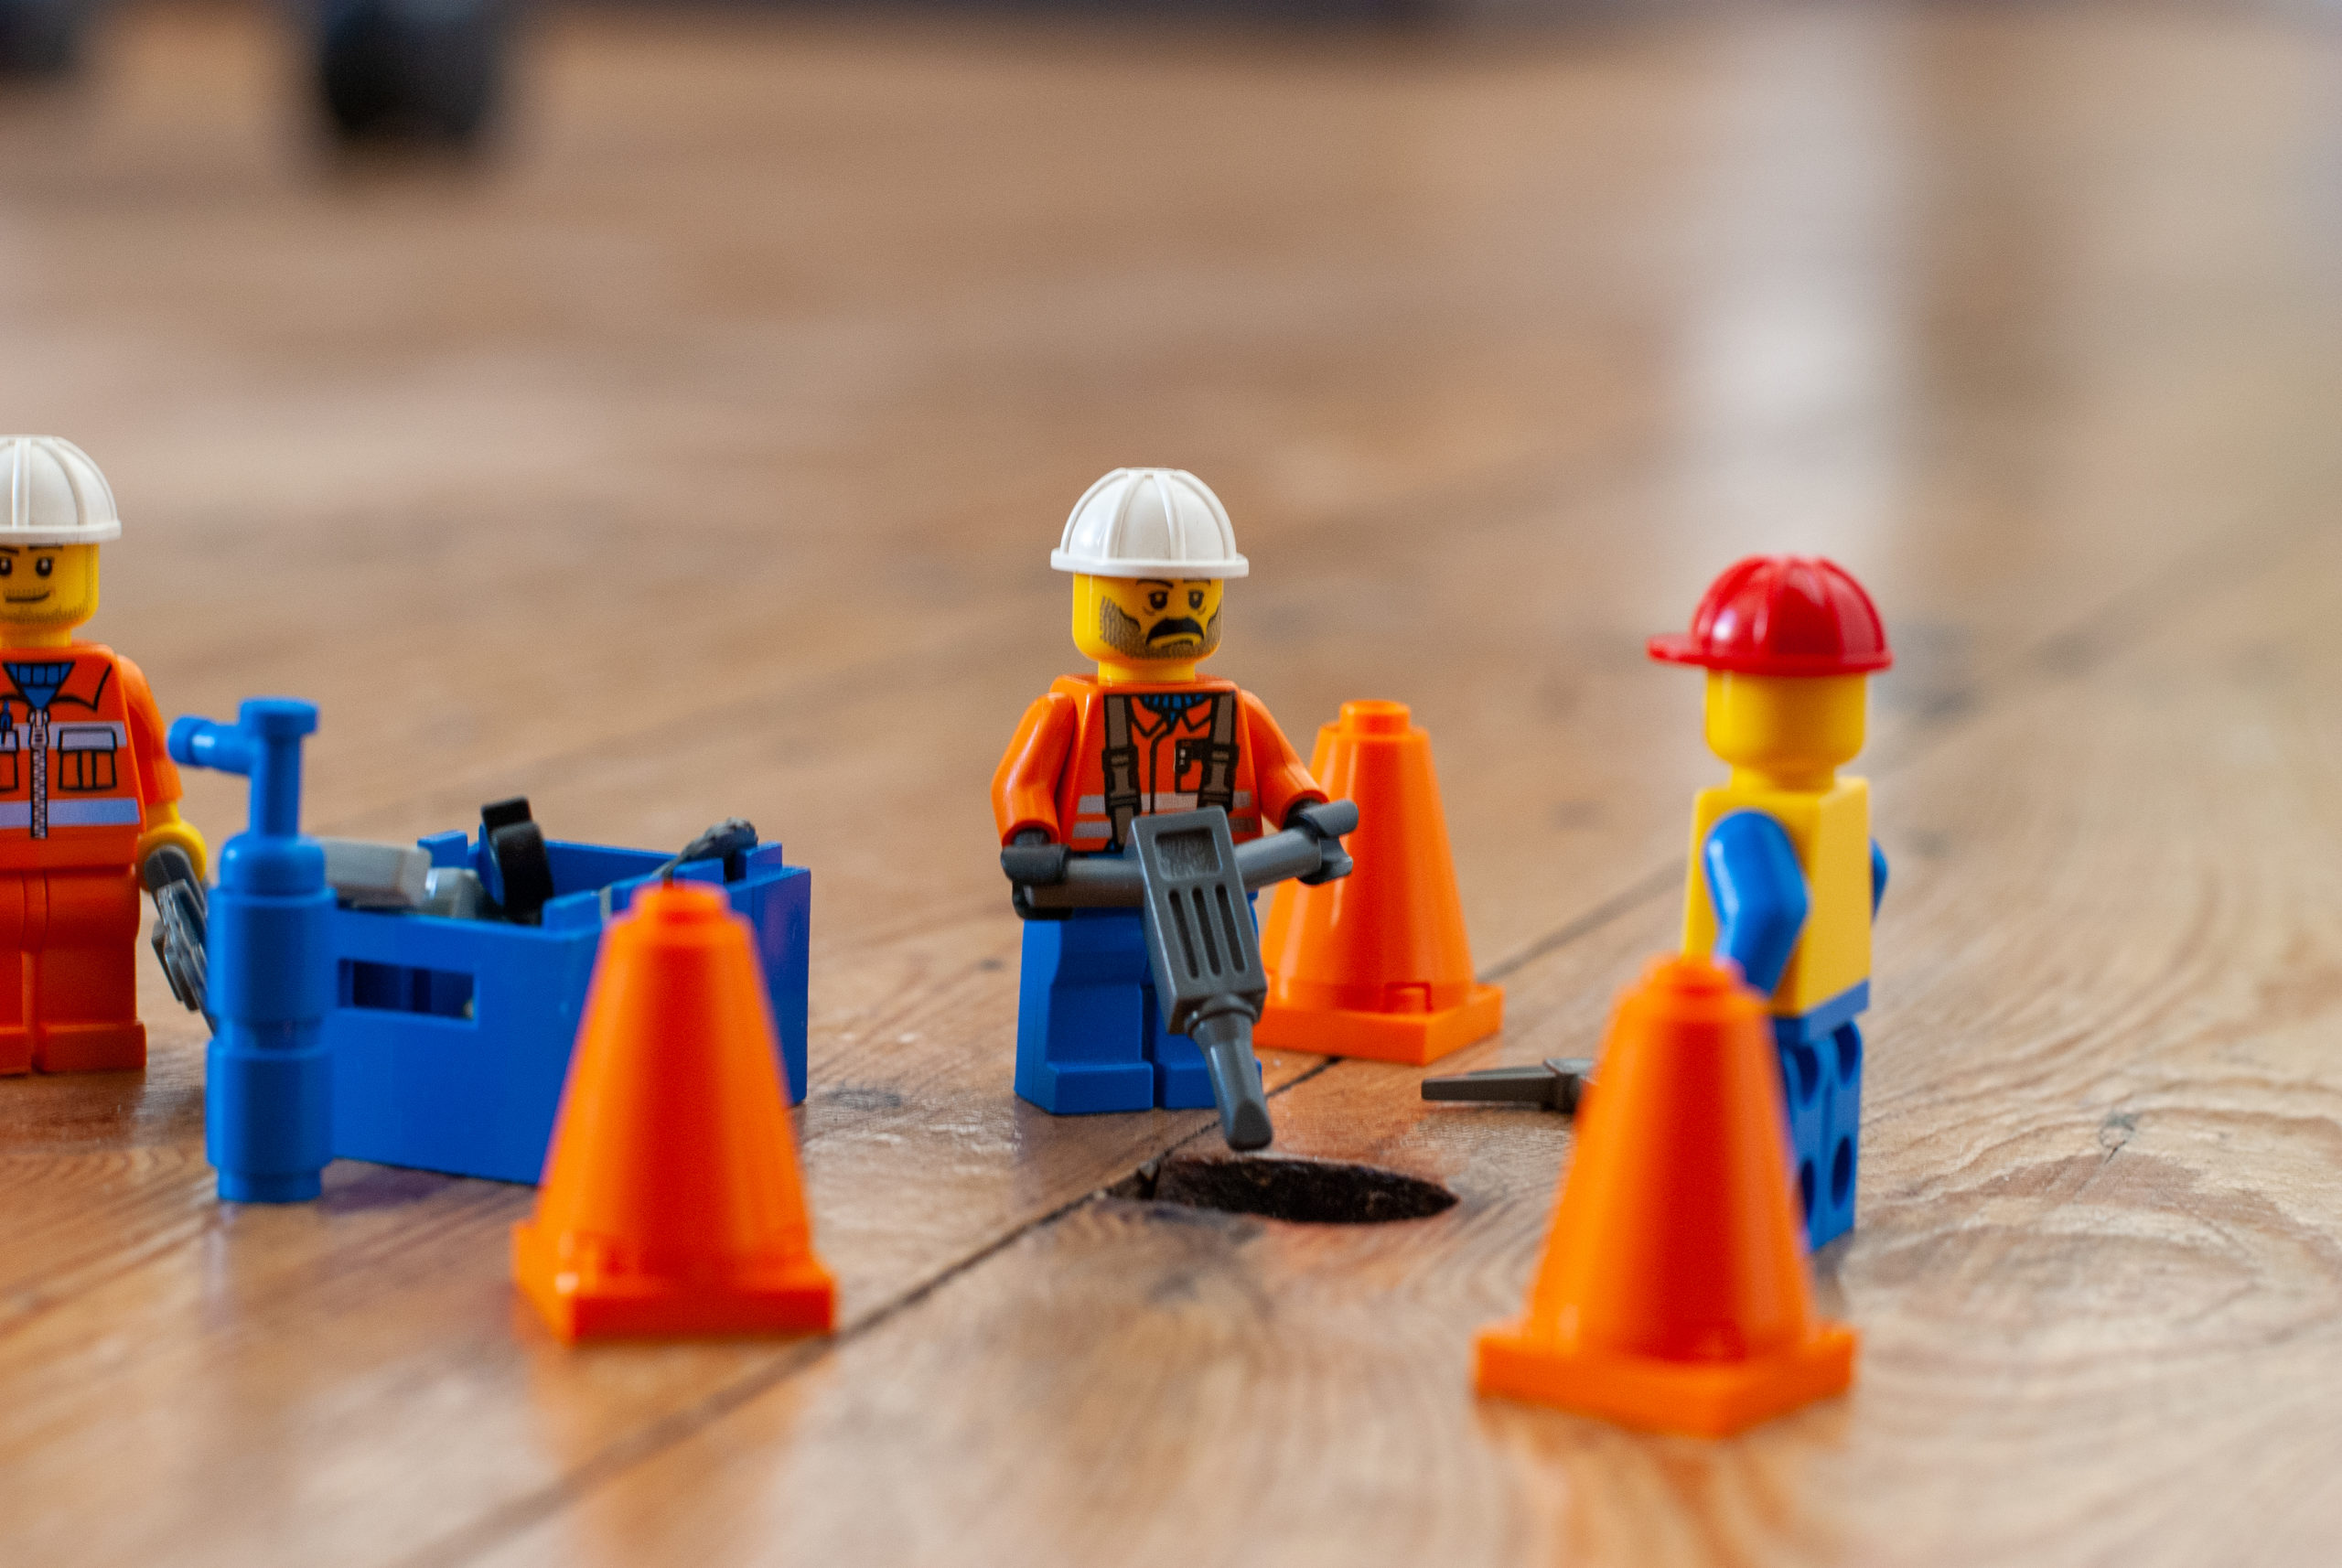 LEGO workers digging a hole